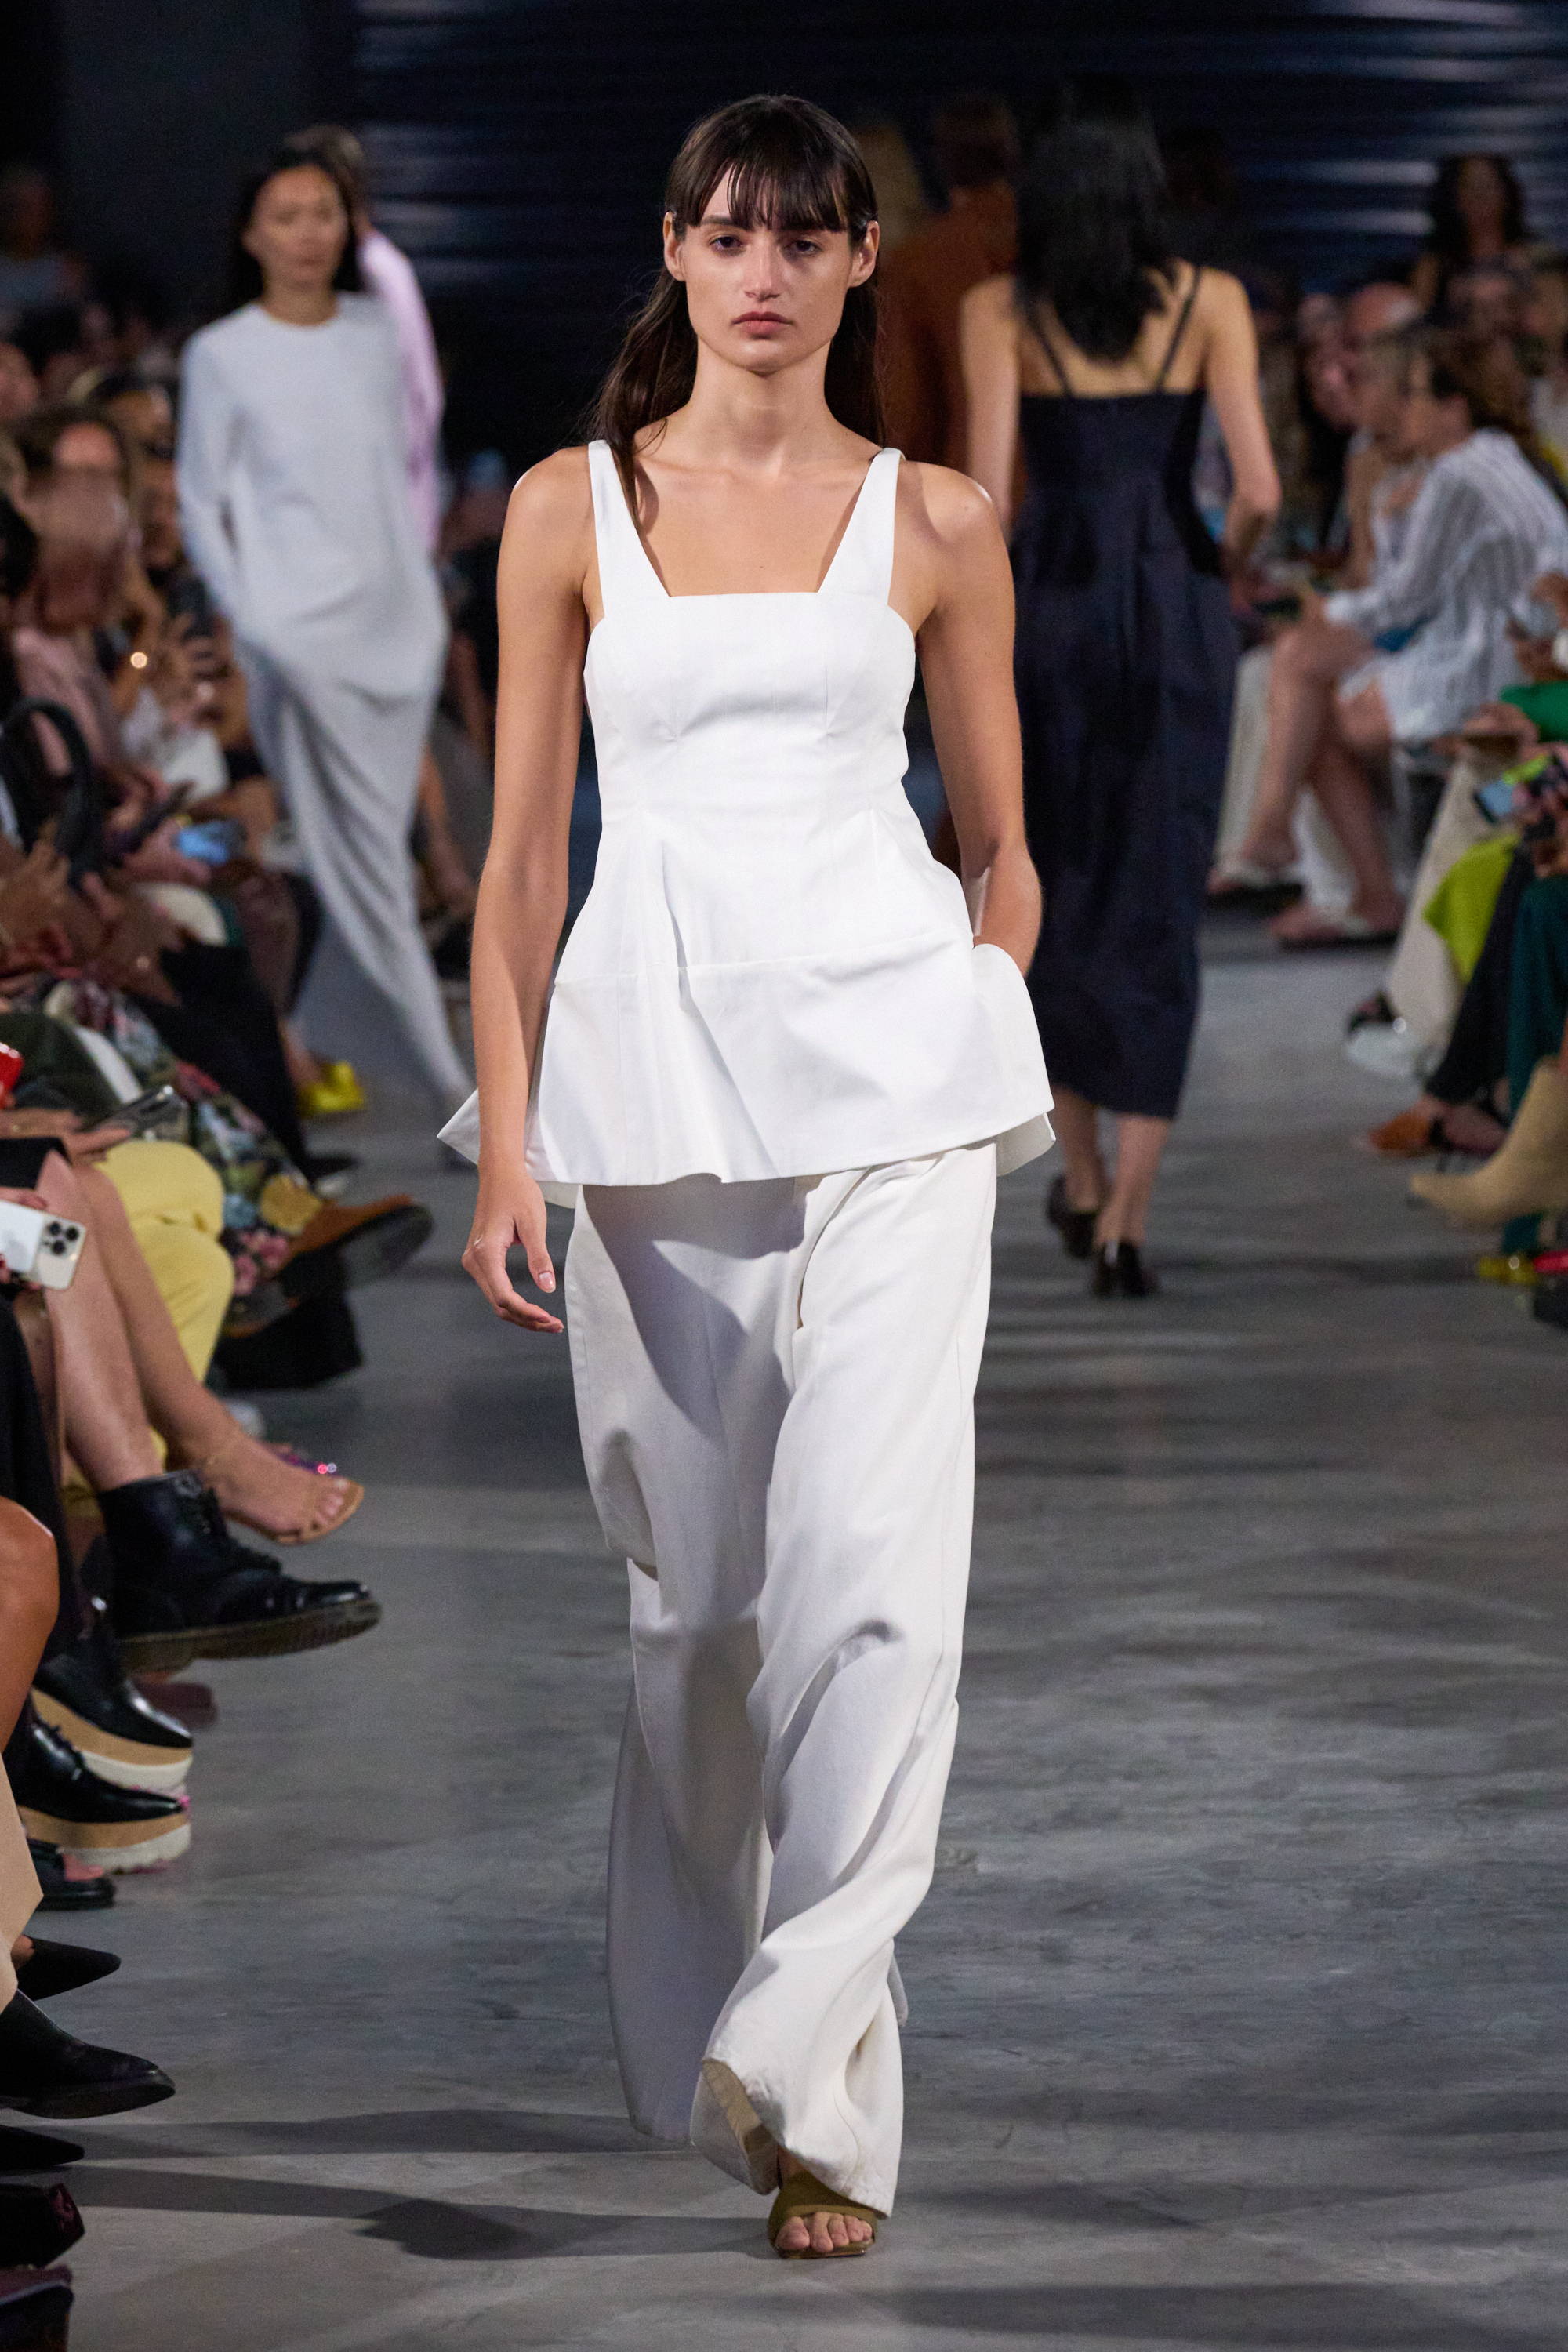 Model on a runway wearing tank top and pants